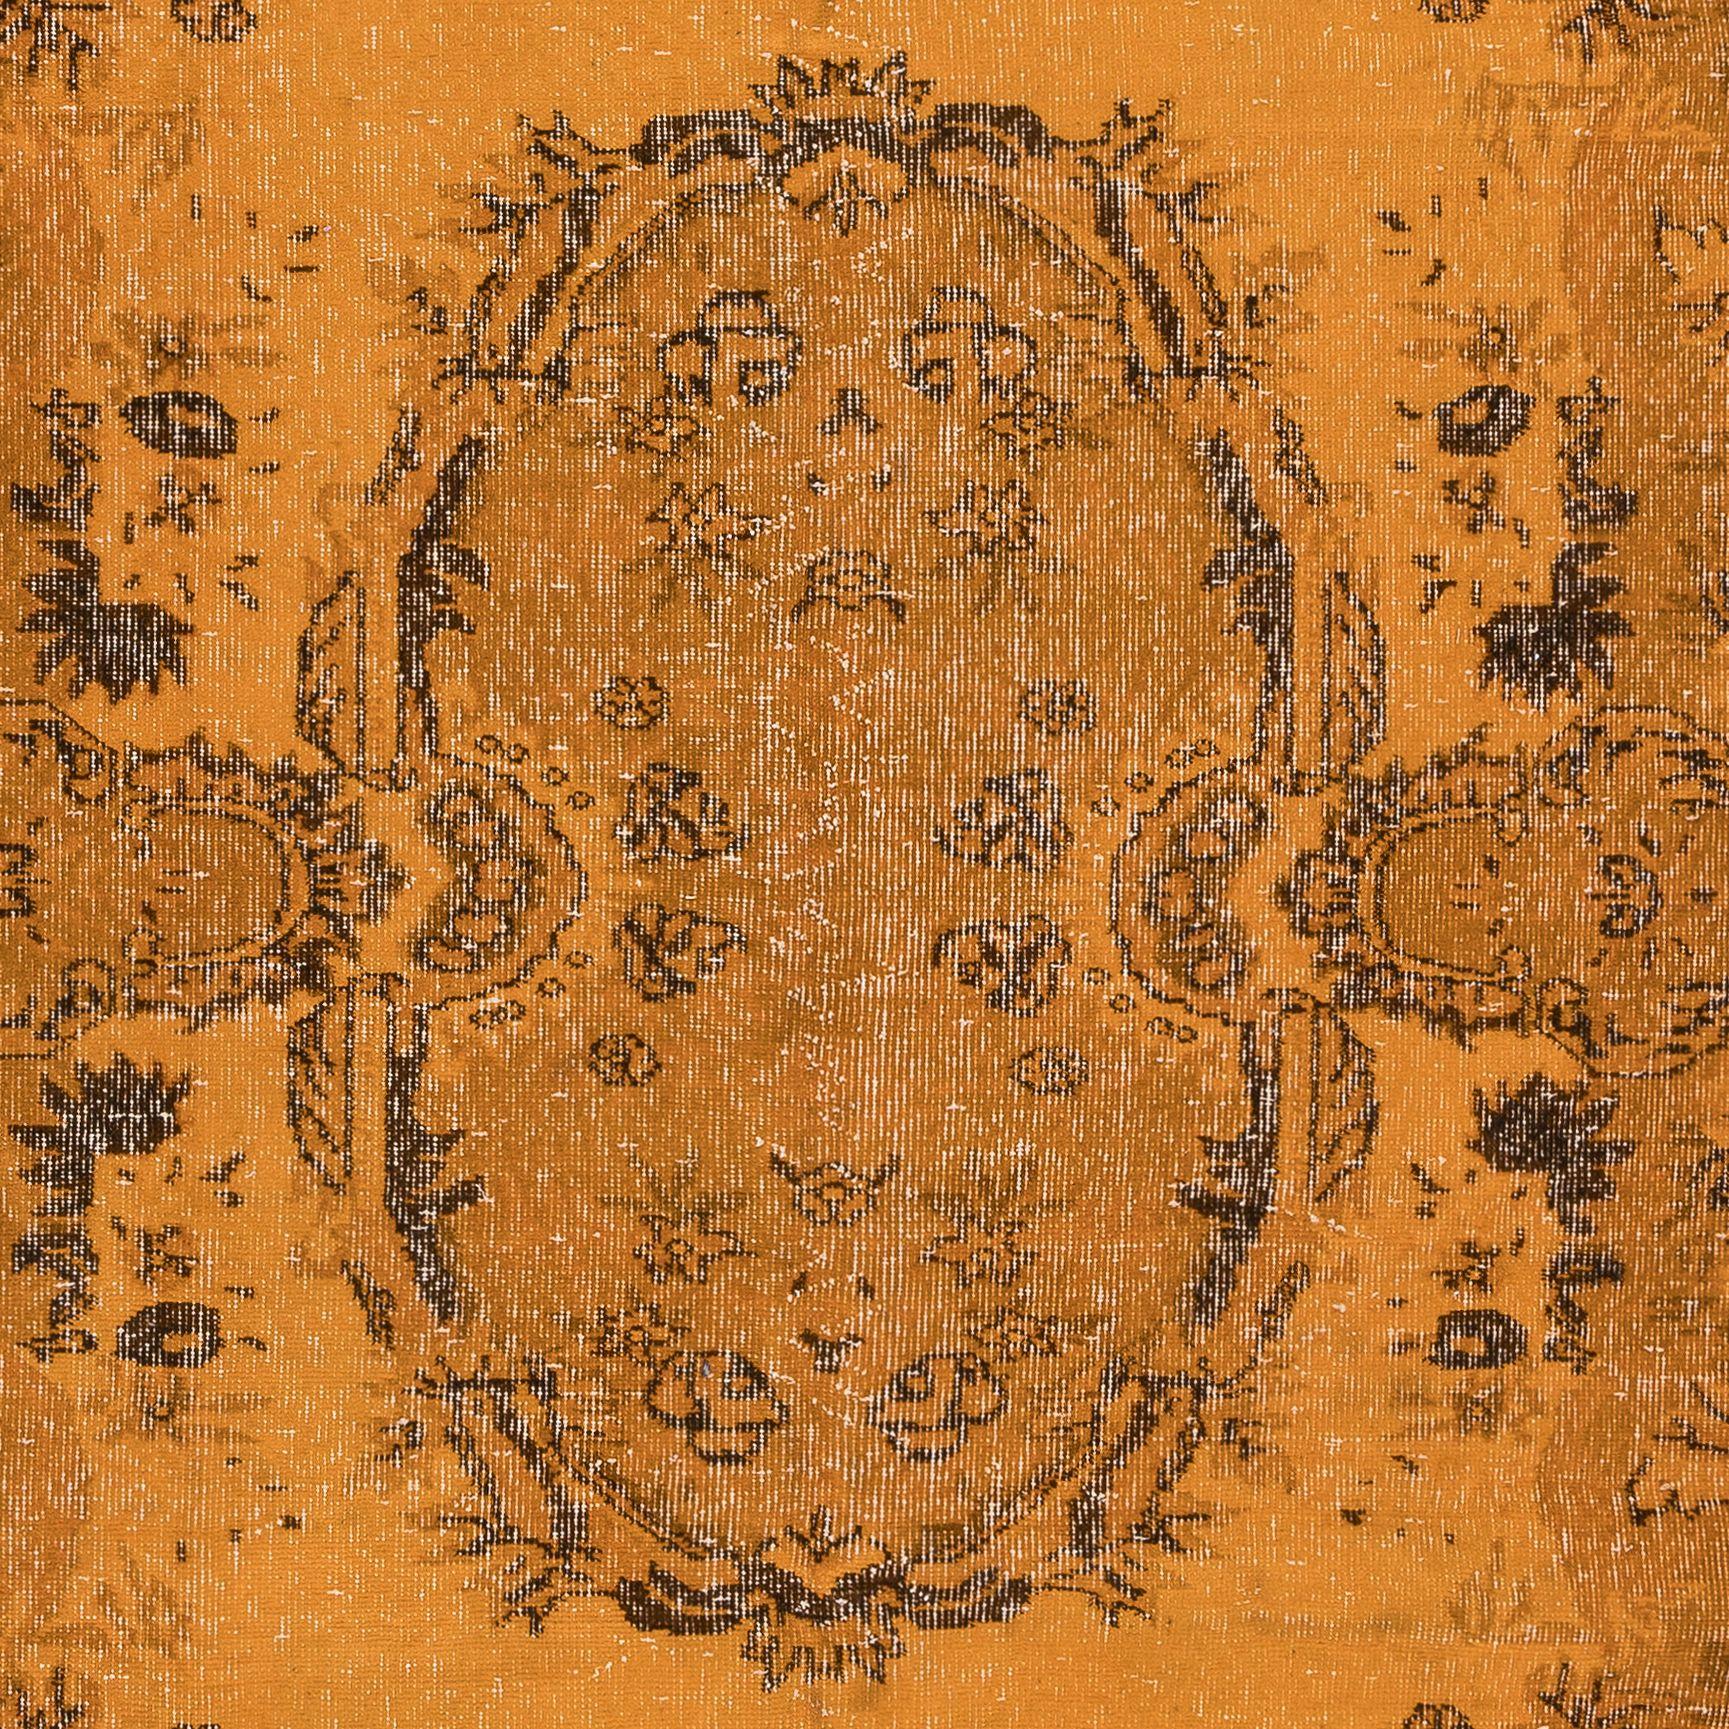 Turkish 5.2x8.4 Ft French Aubusson Inspired Orange Area Rug, Handknotted in Turkey For Sale